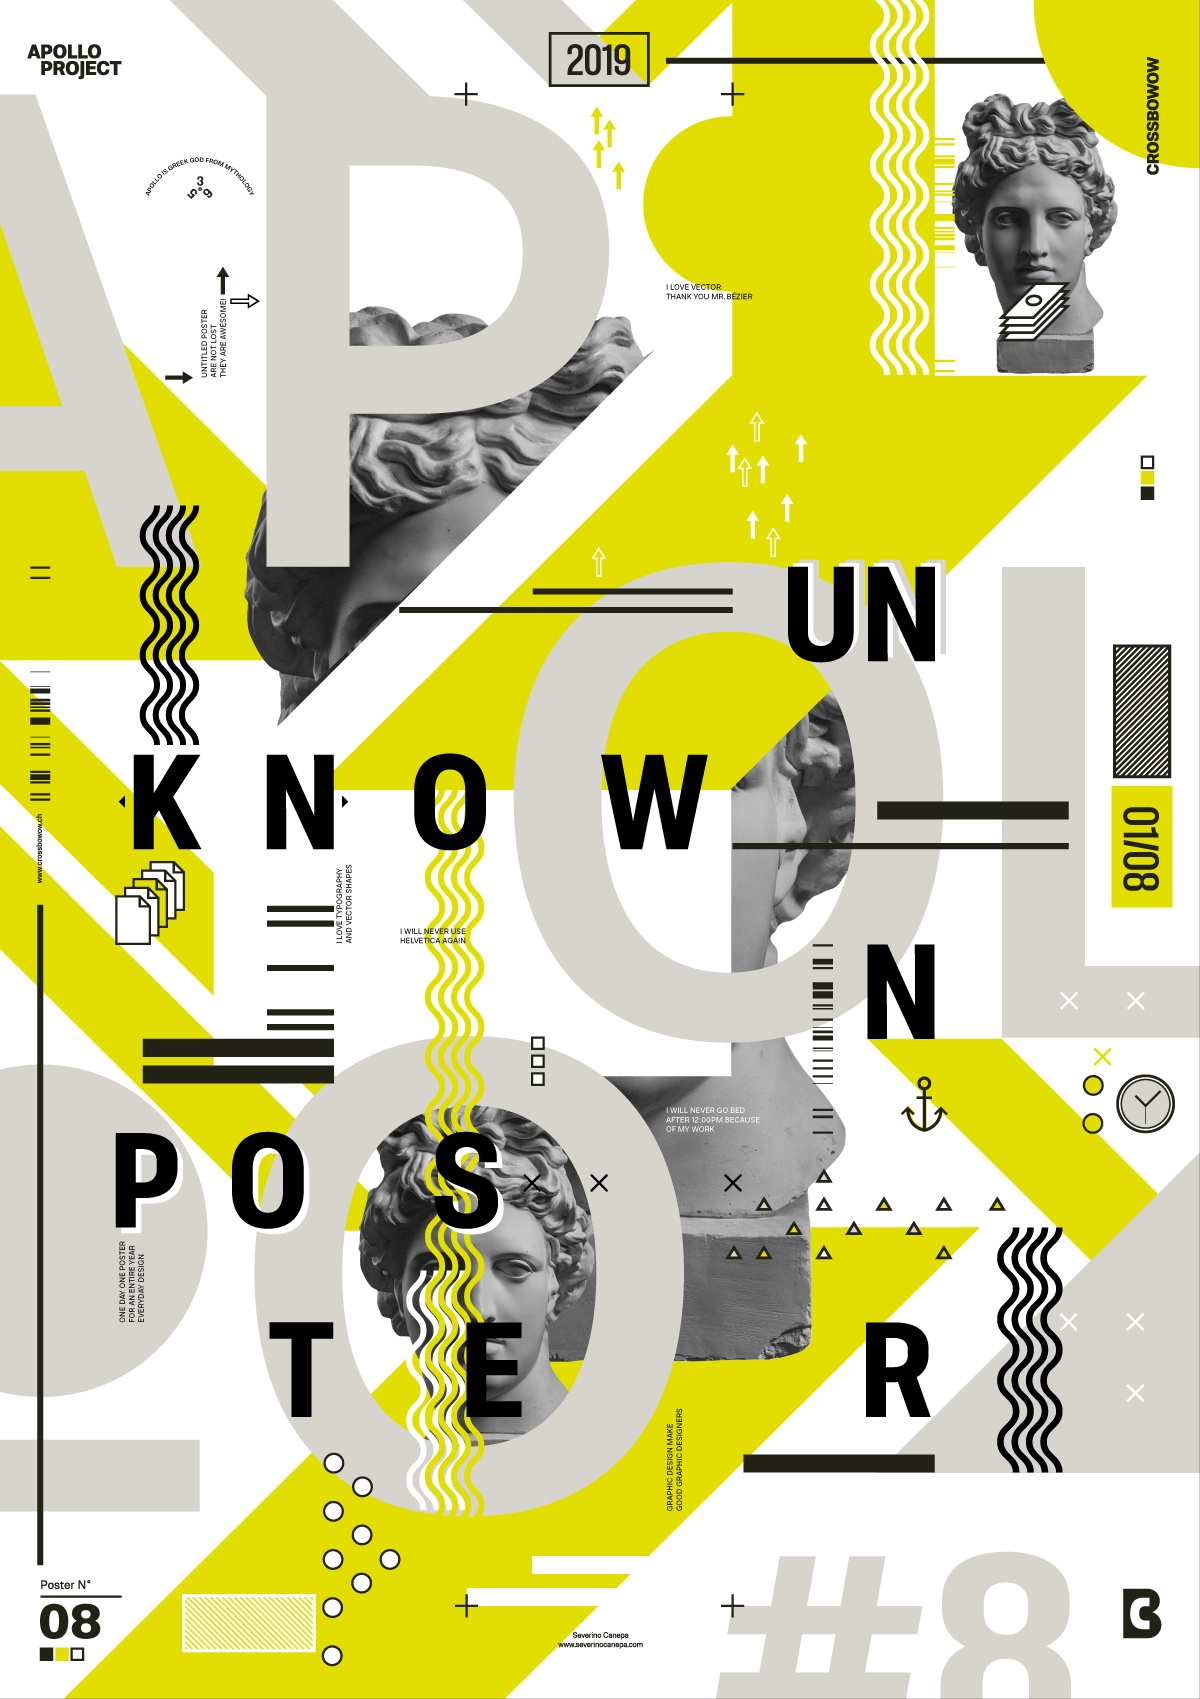 Final design of the Poster number 8 titled Unknown Poster